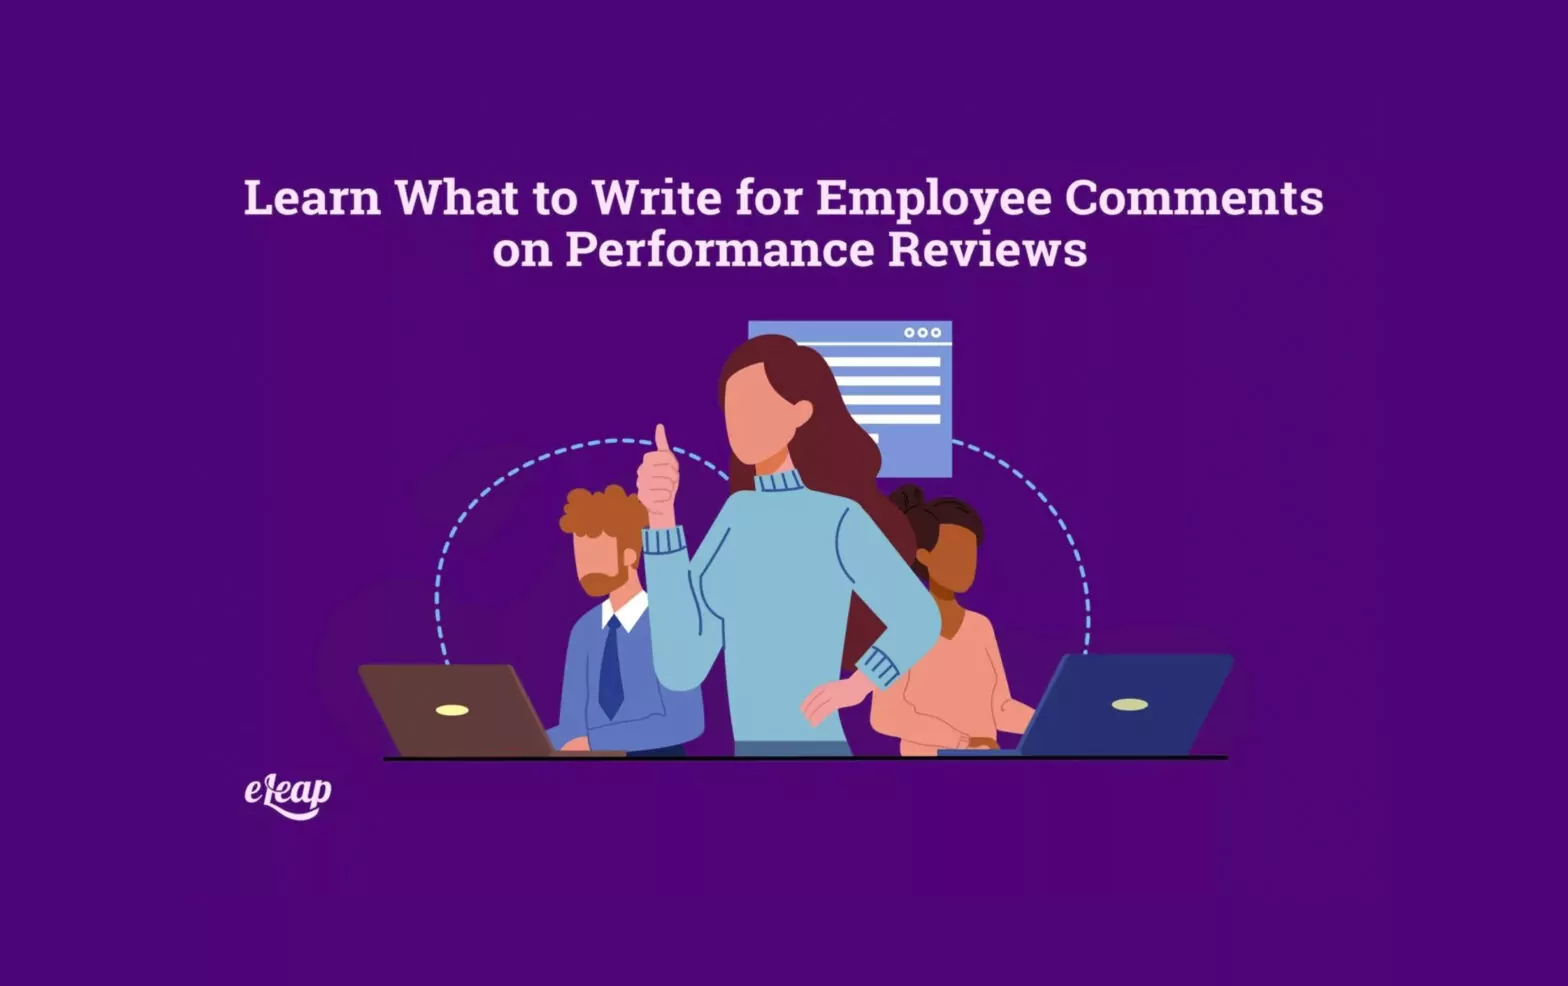 Learn What to Write for Employee Comments on Performance Reviews